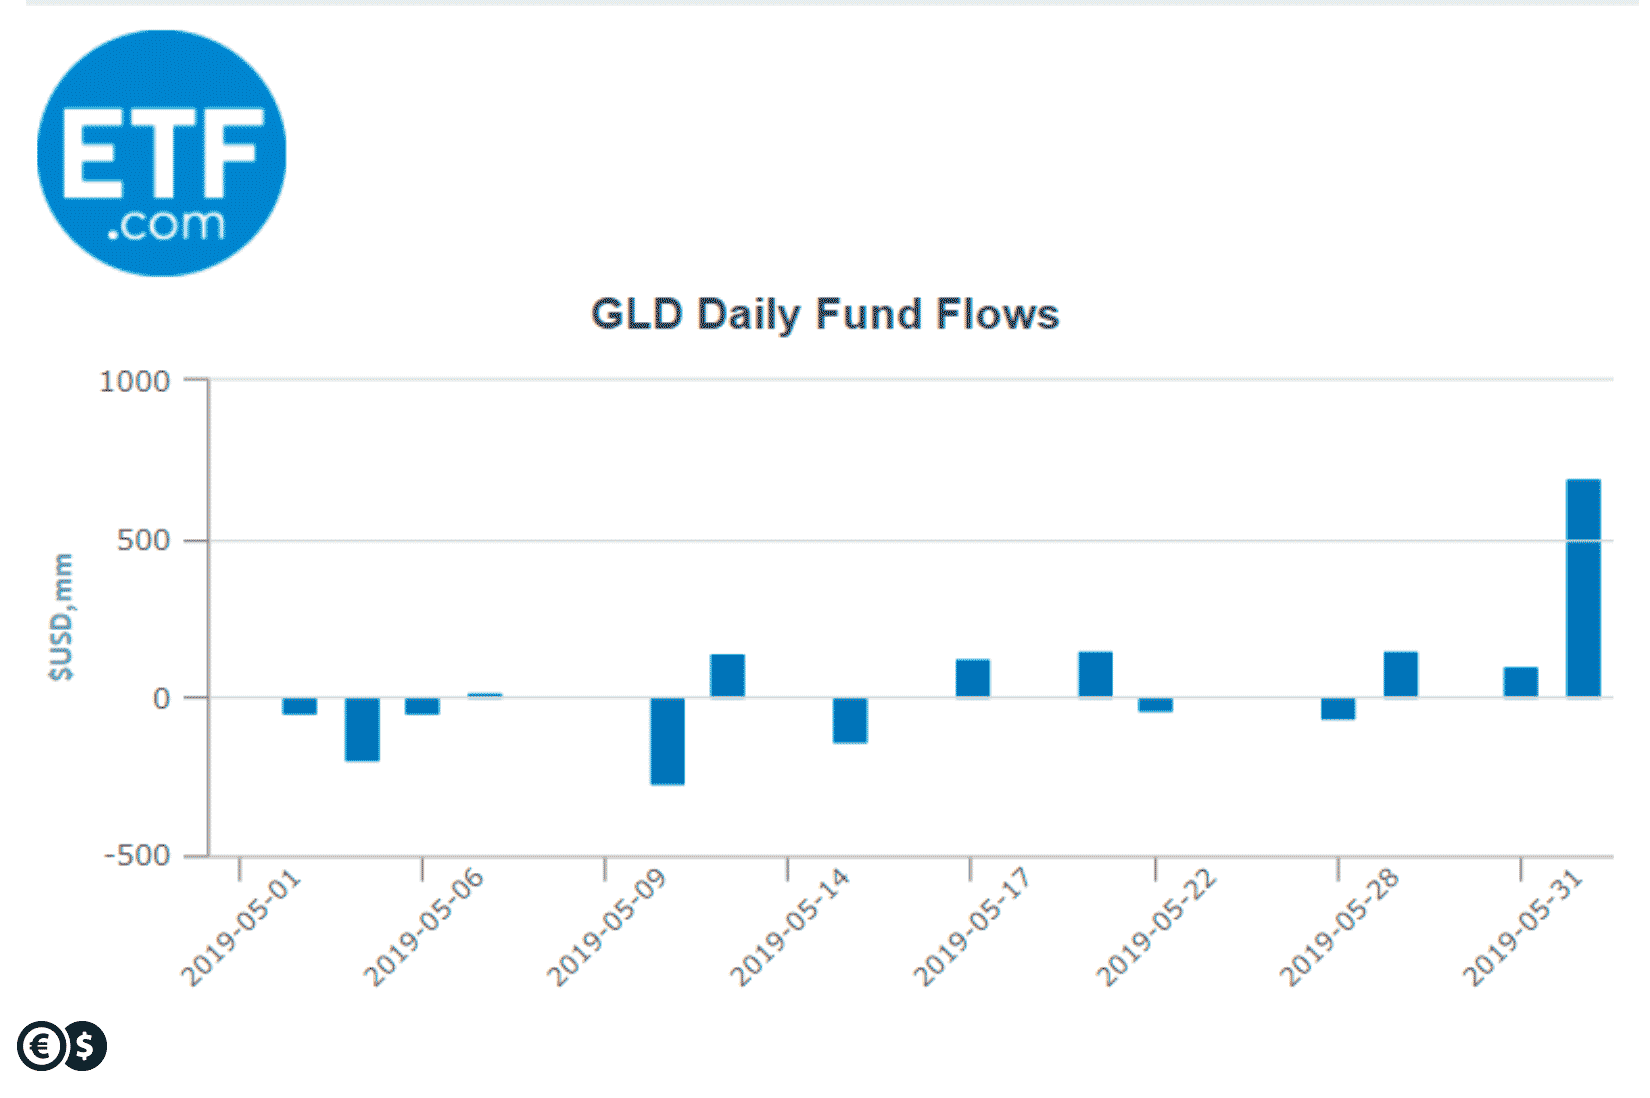 Capital flows to the largest Gold ETF fund